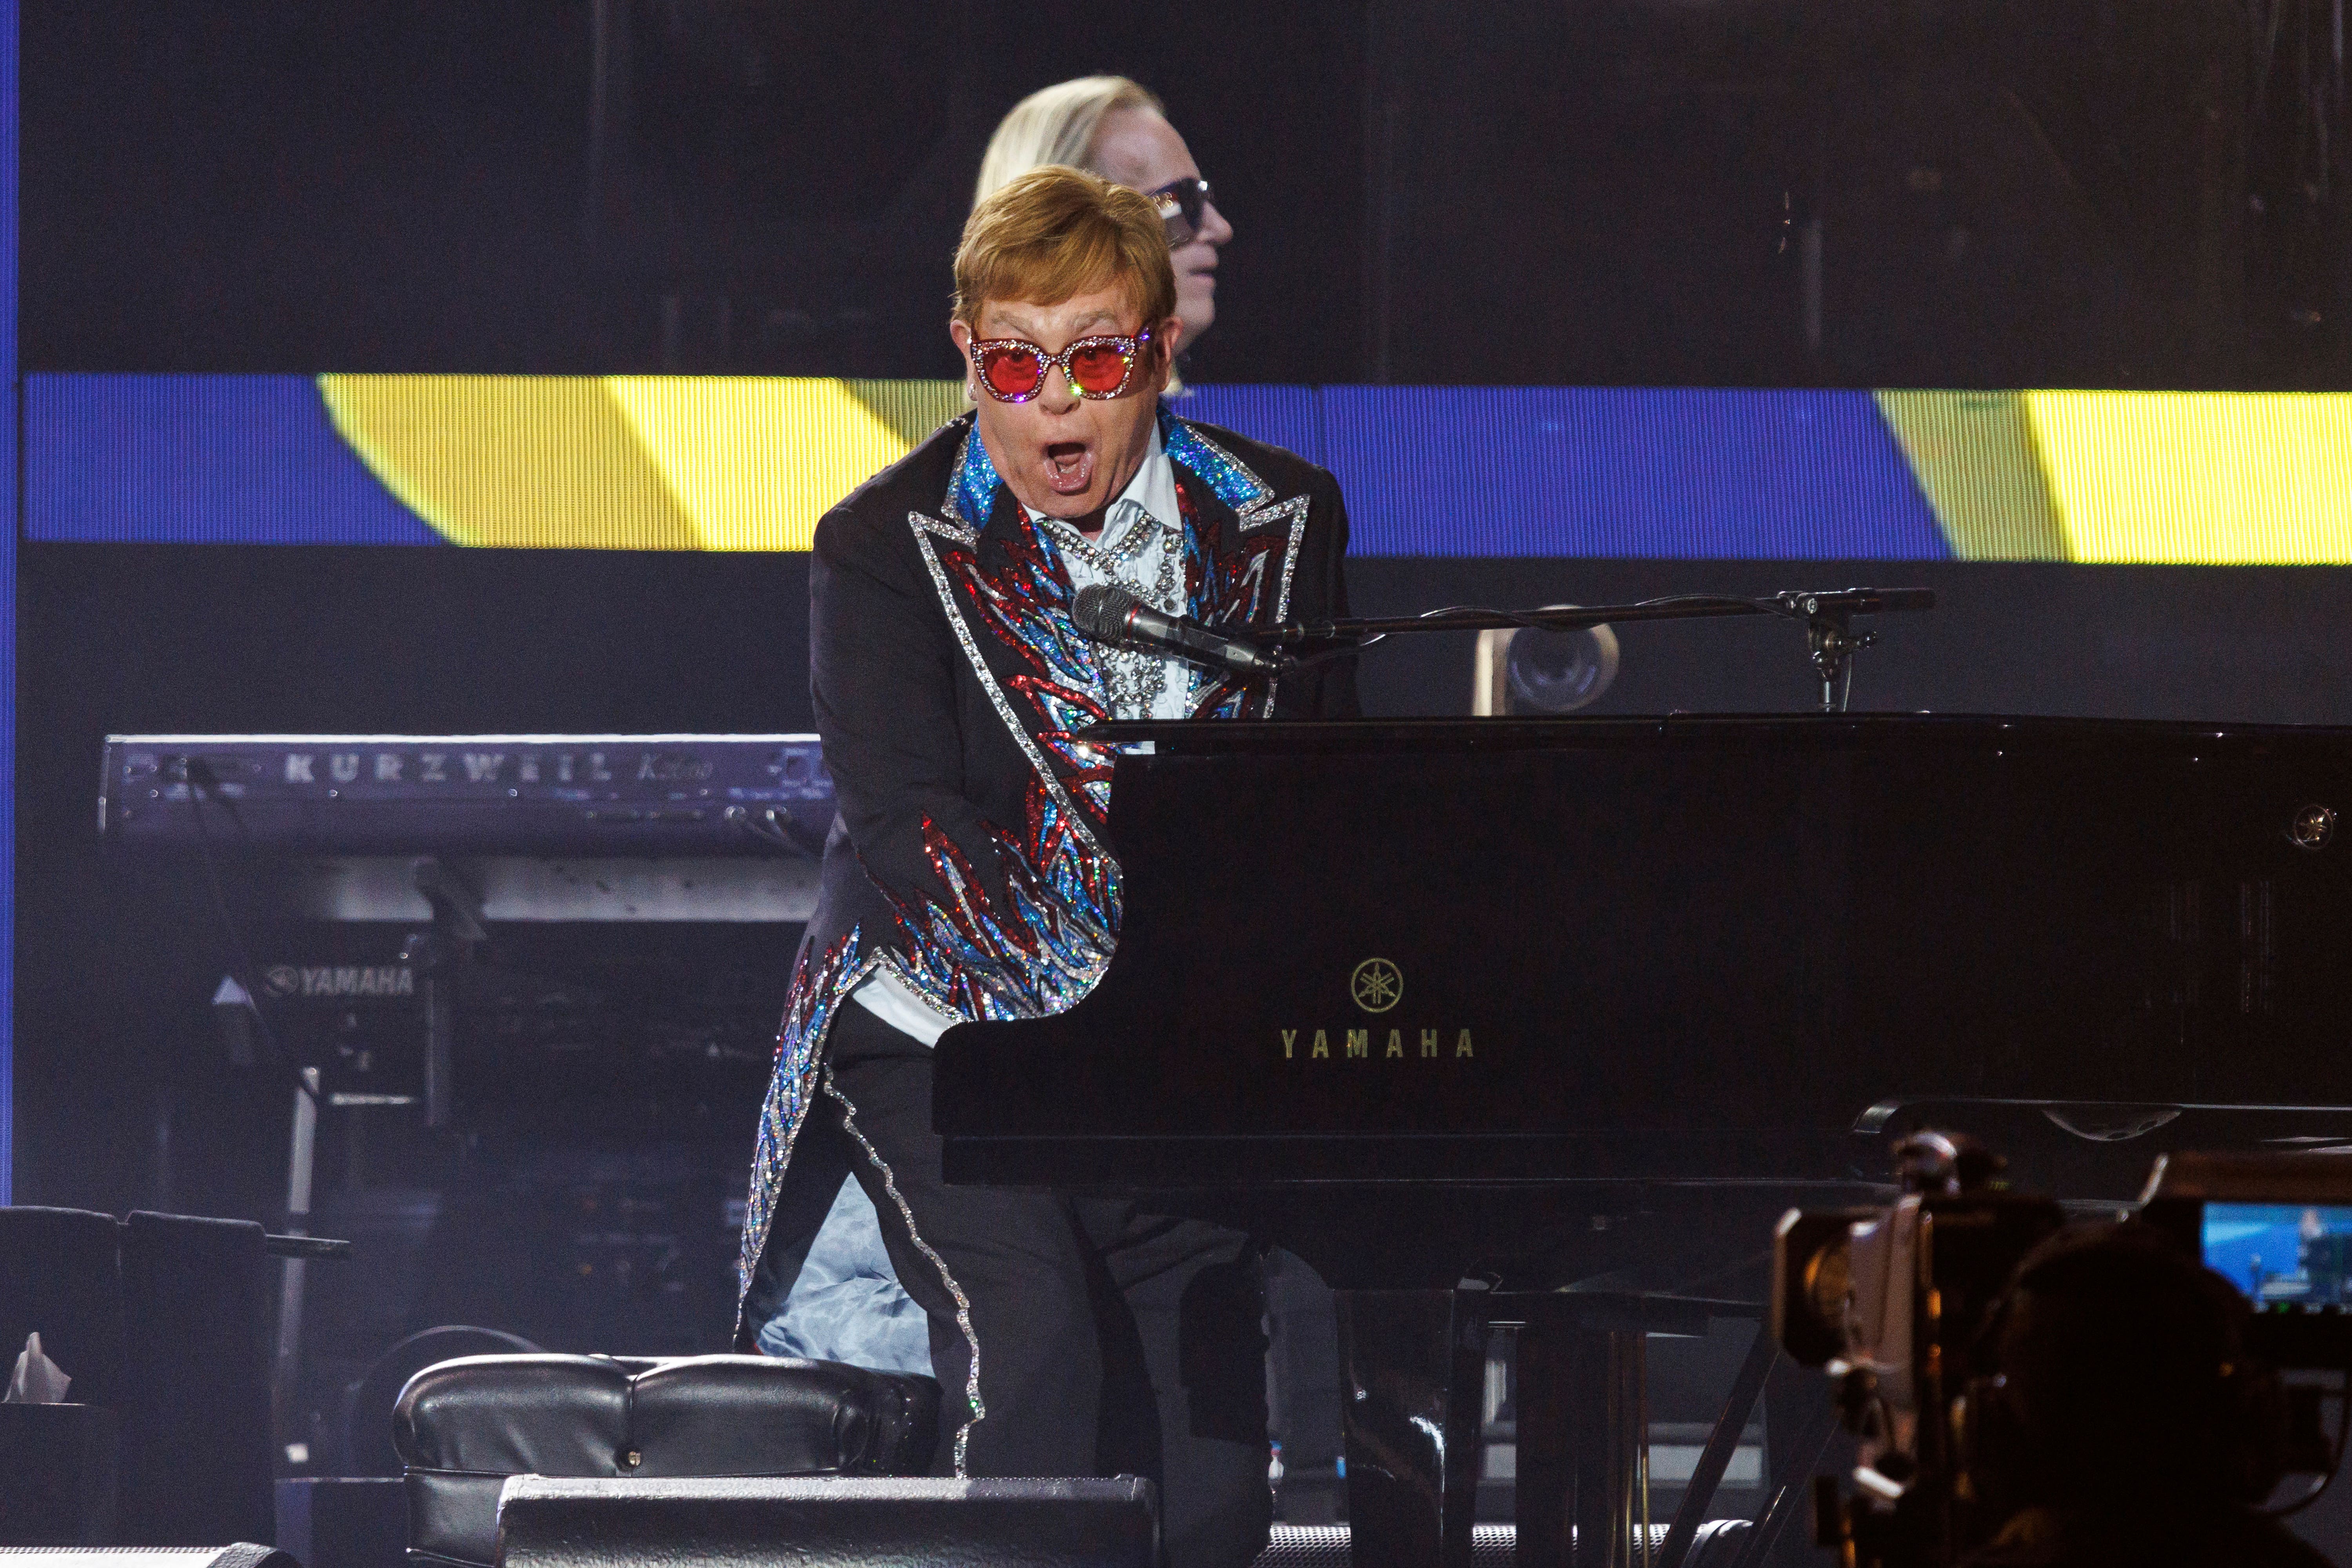 Sir Elton John performs at the Dodger Stadium in Los Angeles (Willy Sanjuan/Invision/AP)